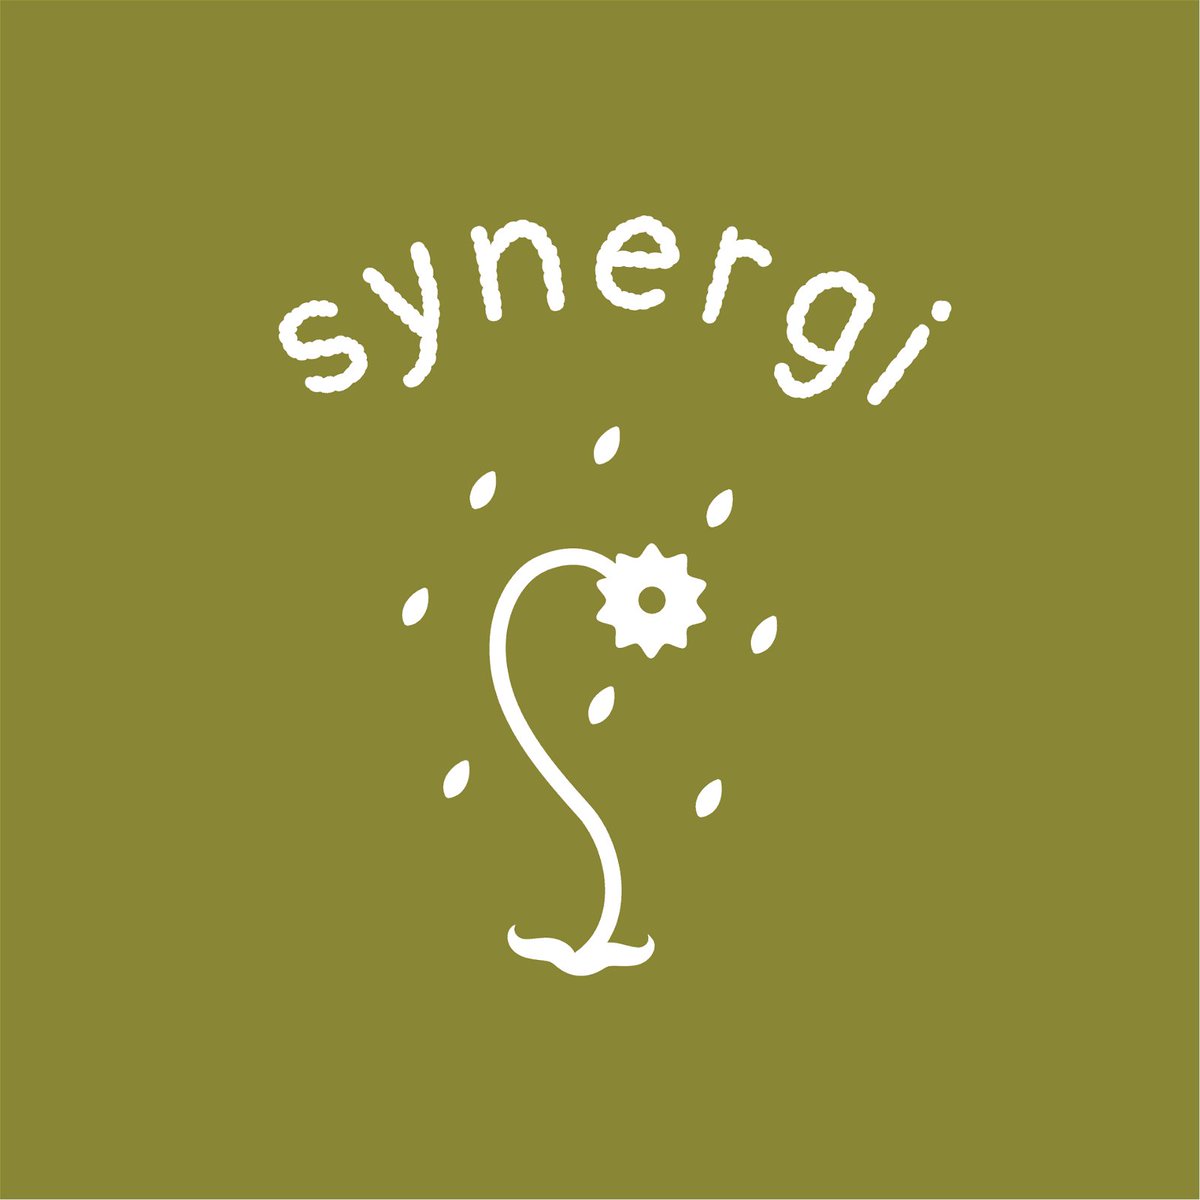 Funding Alert 📣 @SynergiProject are offering funding up to £5,000 to groups working at the intersection between racial justice & mental health, distress or trauma. 📅Application deadline - 30 May 2024 at 5pm For further details go to👉 ow.ly/UCms50RMQmS